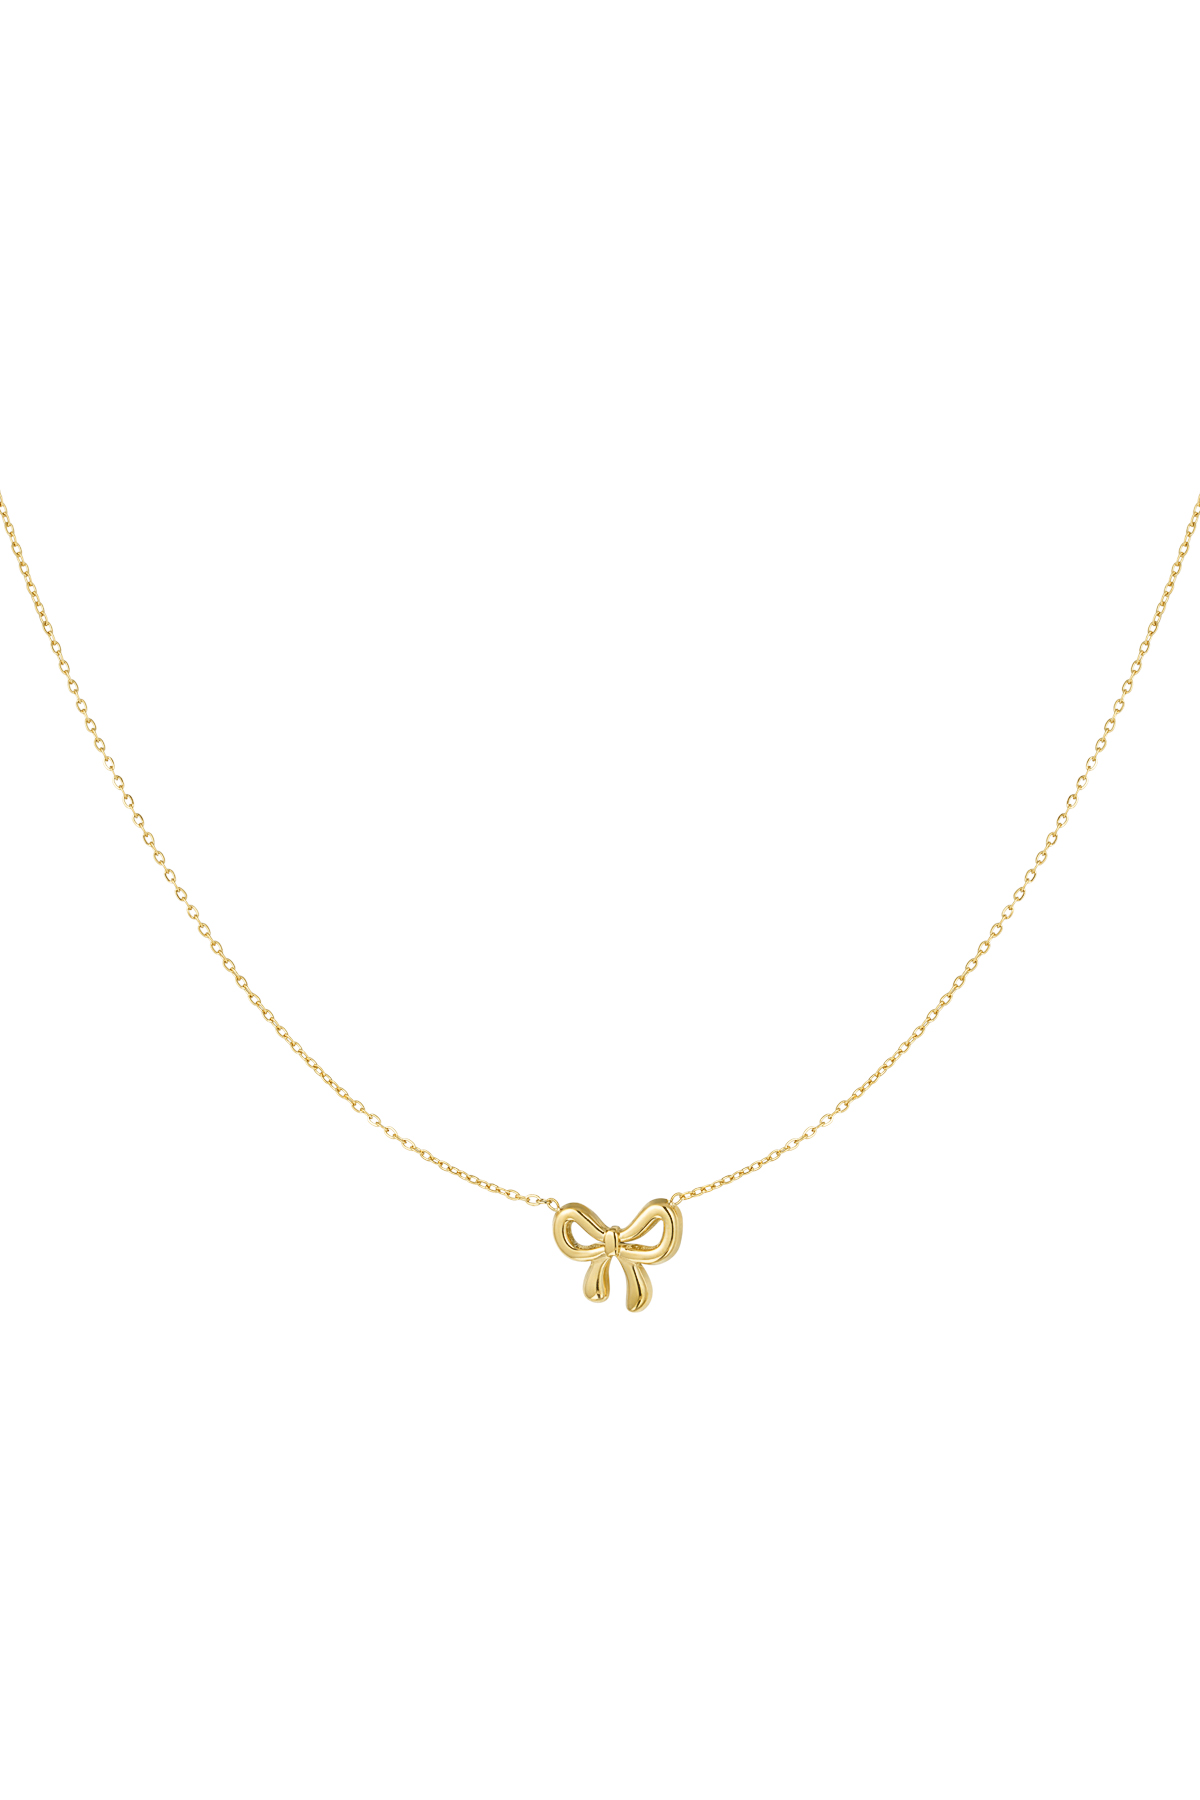 Simple bow necklace - gold  h5 